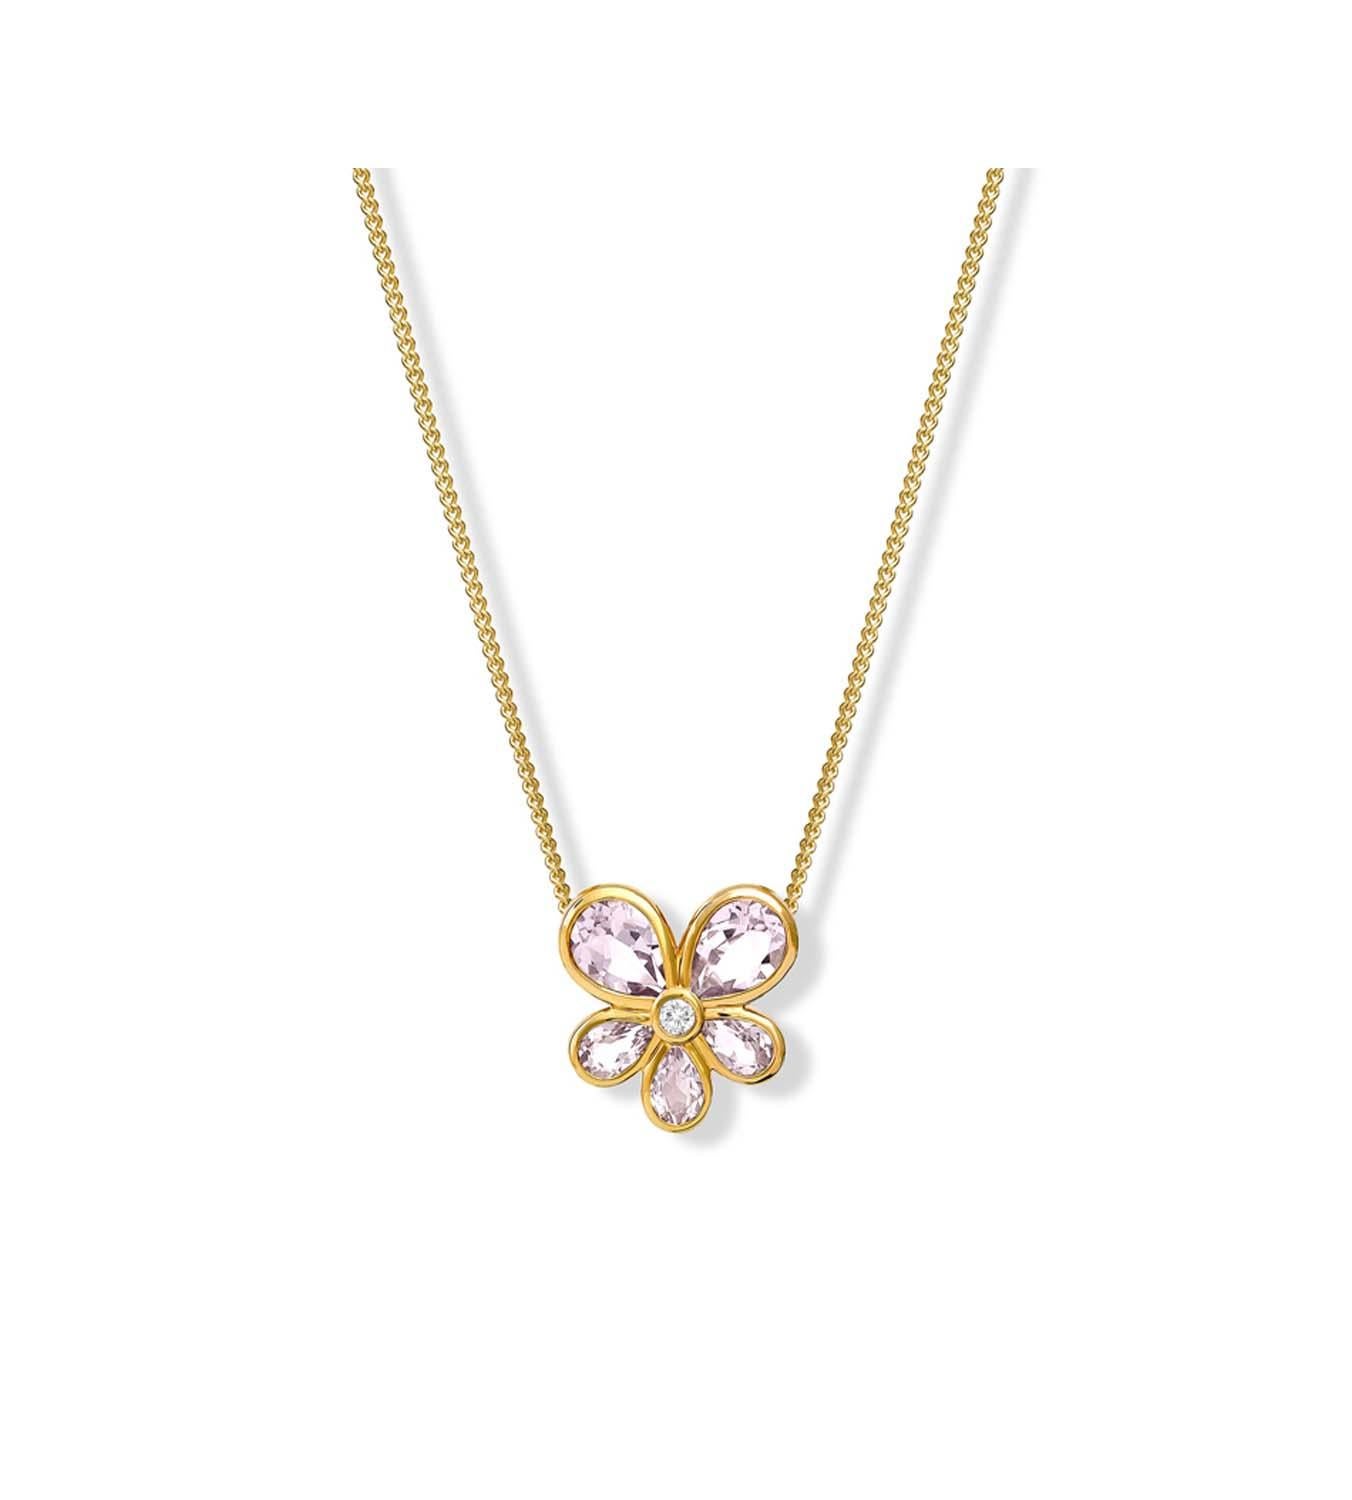 Medium Viola necklace pendant in 9 carat yellow gold set with five facetted pale soft pink amethyst and a central diamond. Inspired on the native Viola (wild pansy) flowers of Sicily. Viola is the flower that symbolises remembrance. From Cassandra's